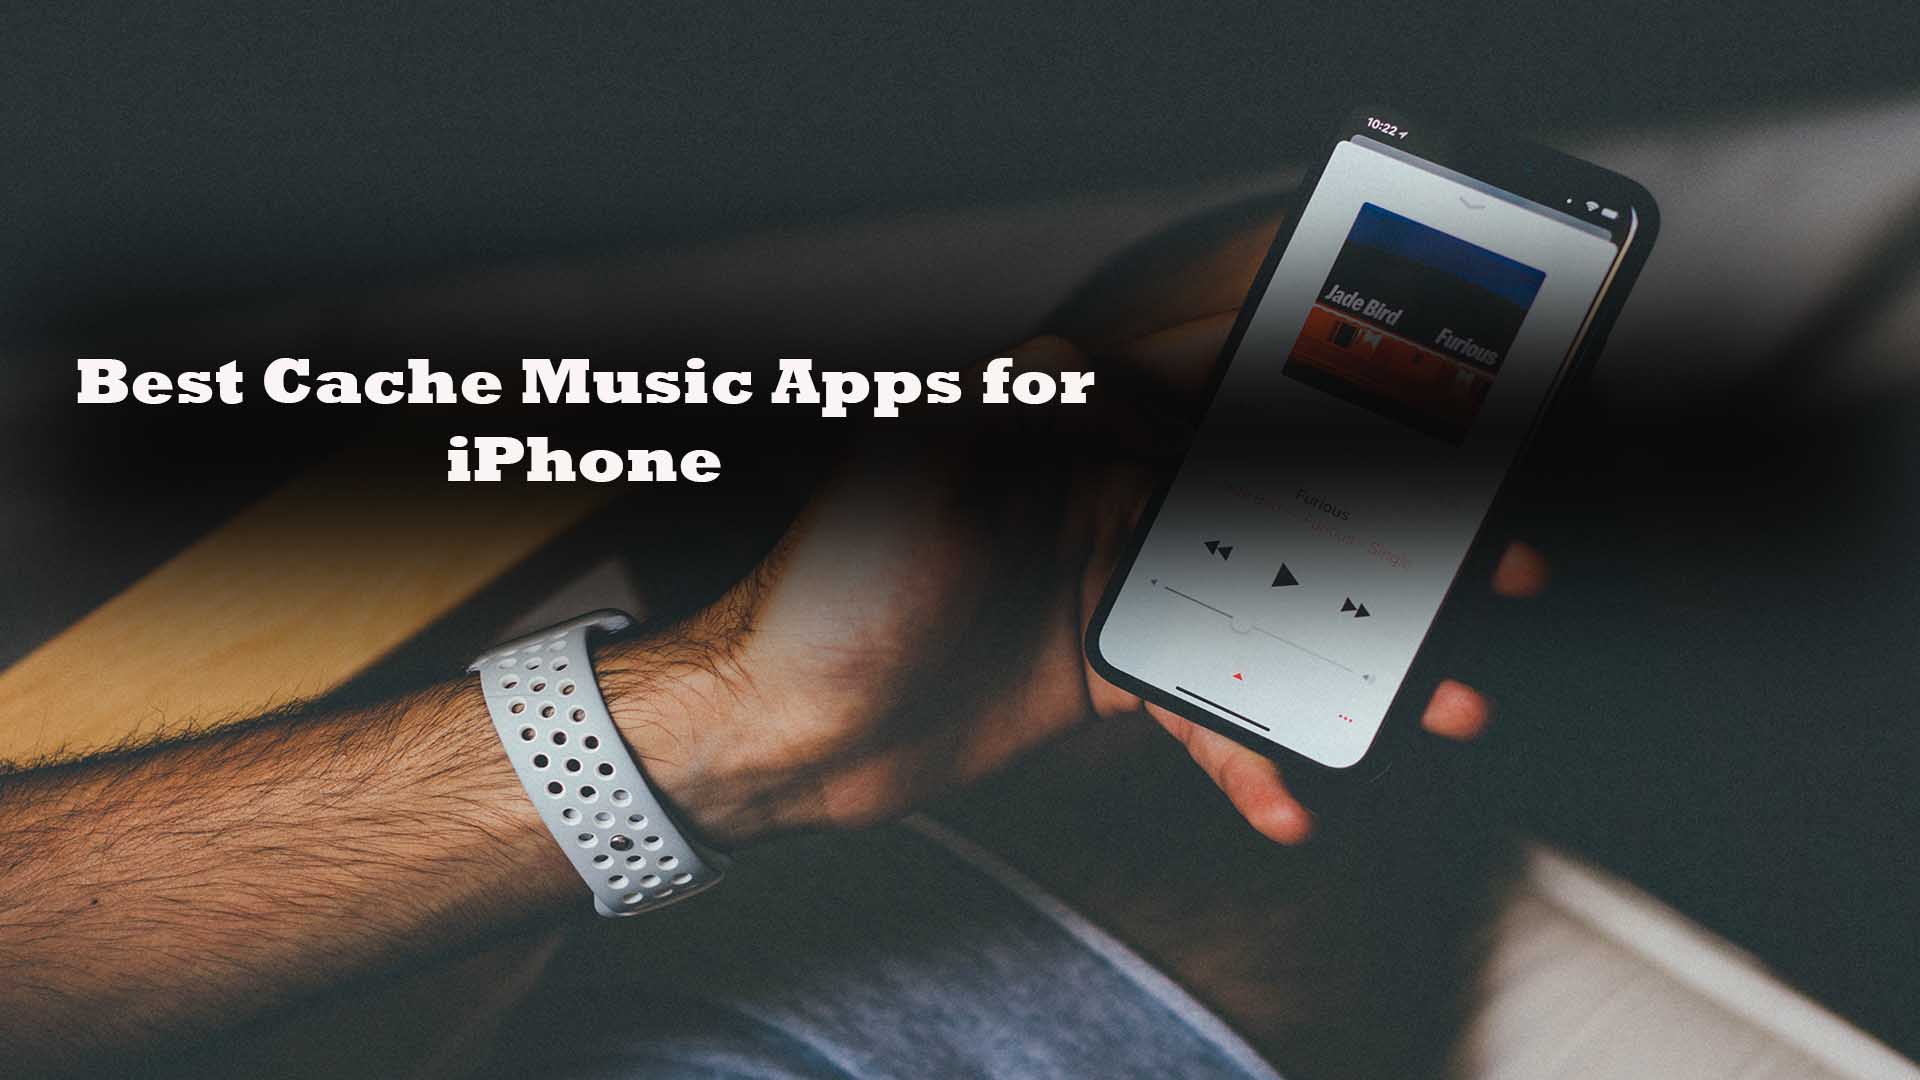 10 Best Cache Music Apps for iPhone